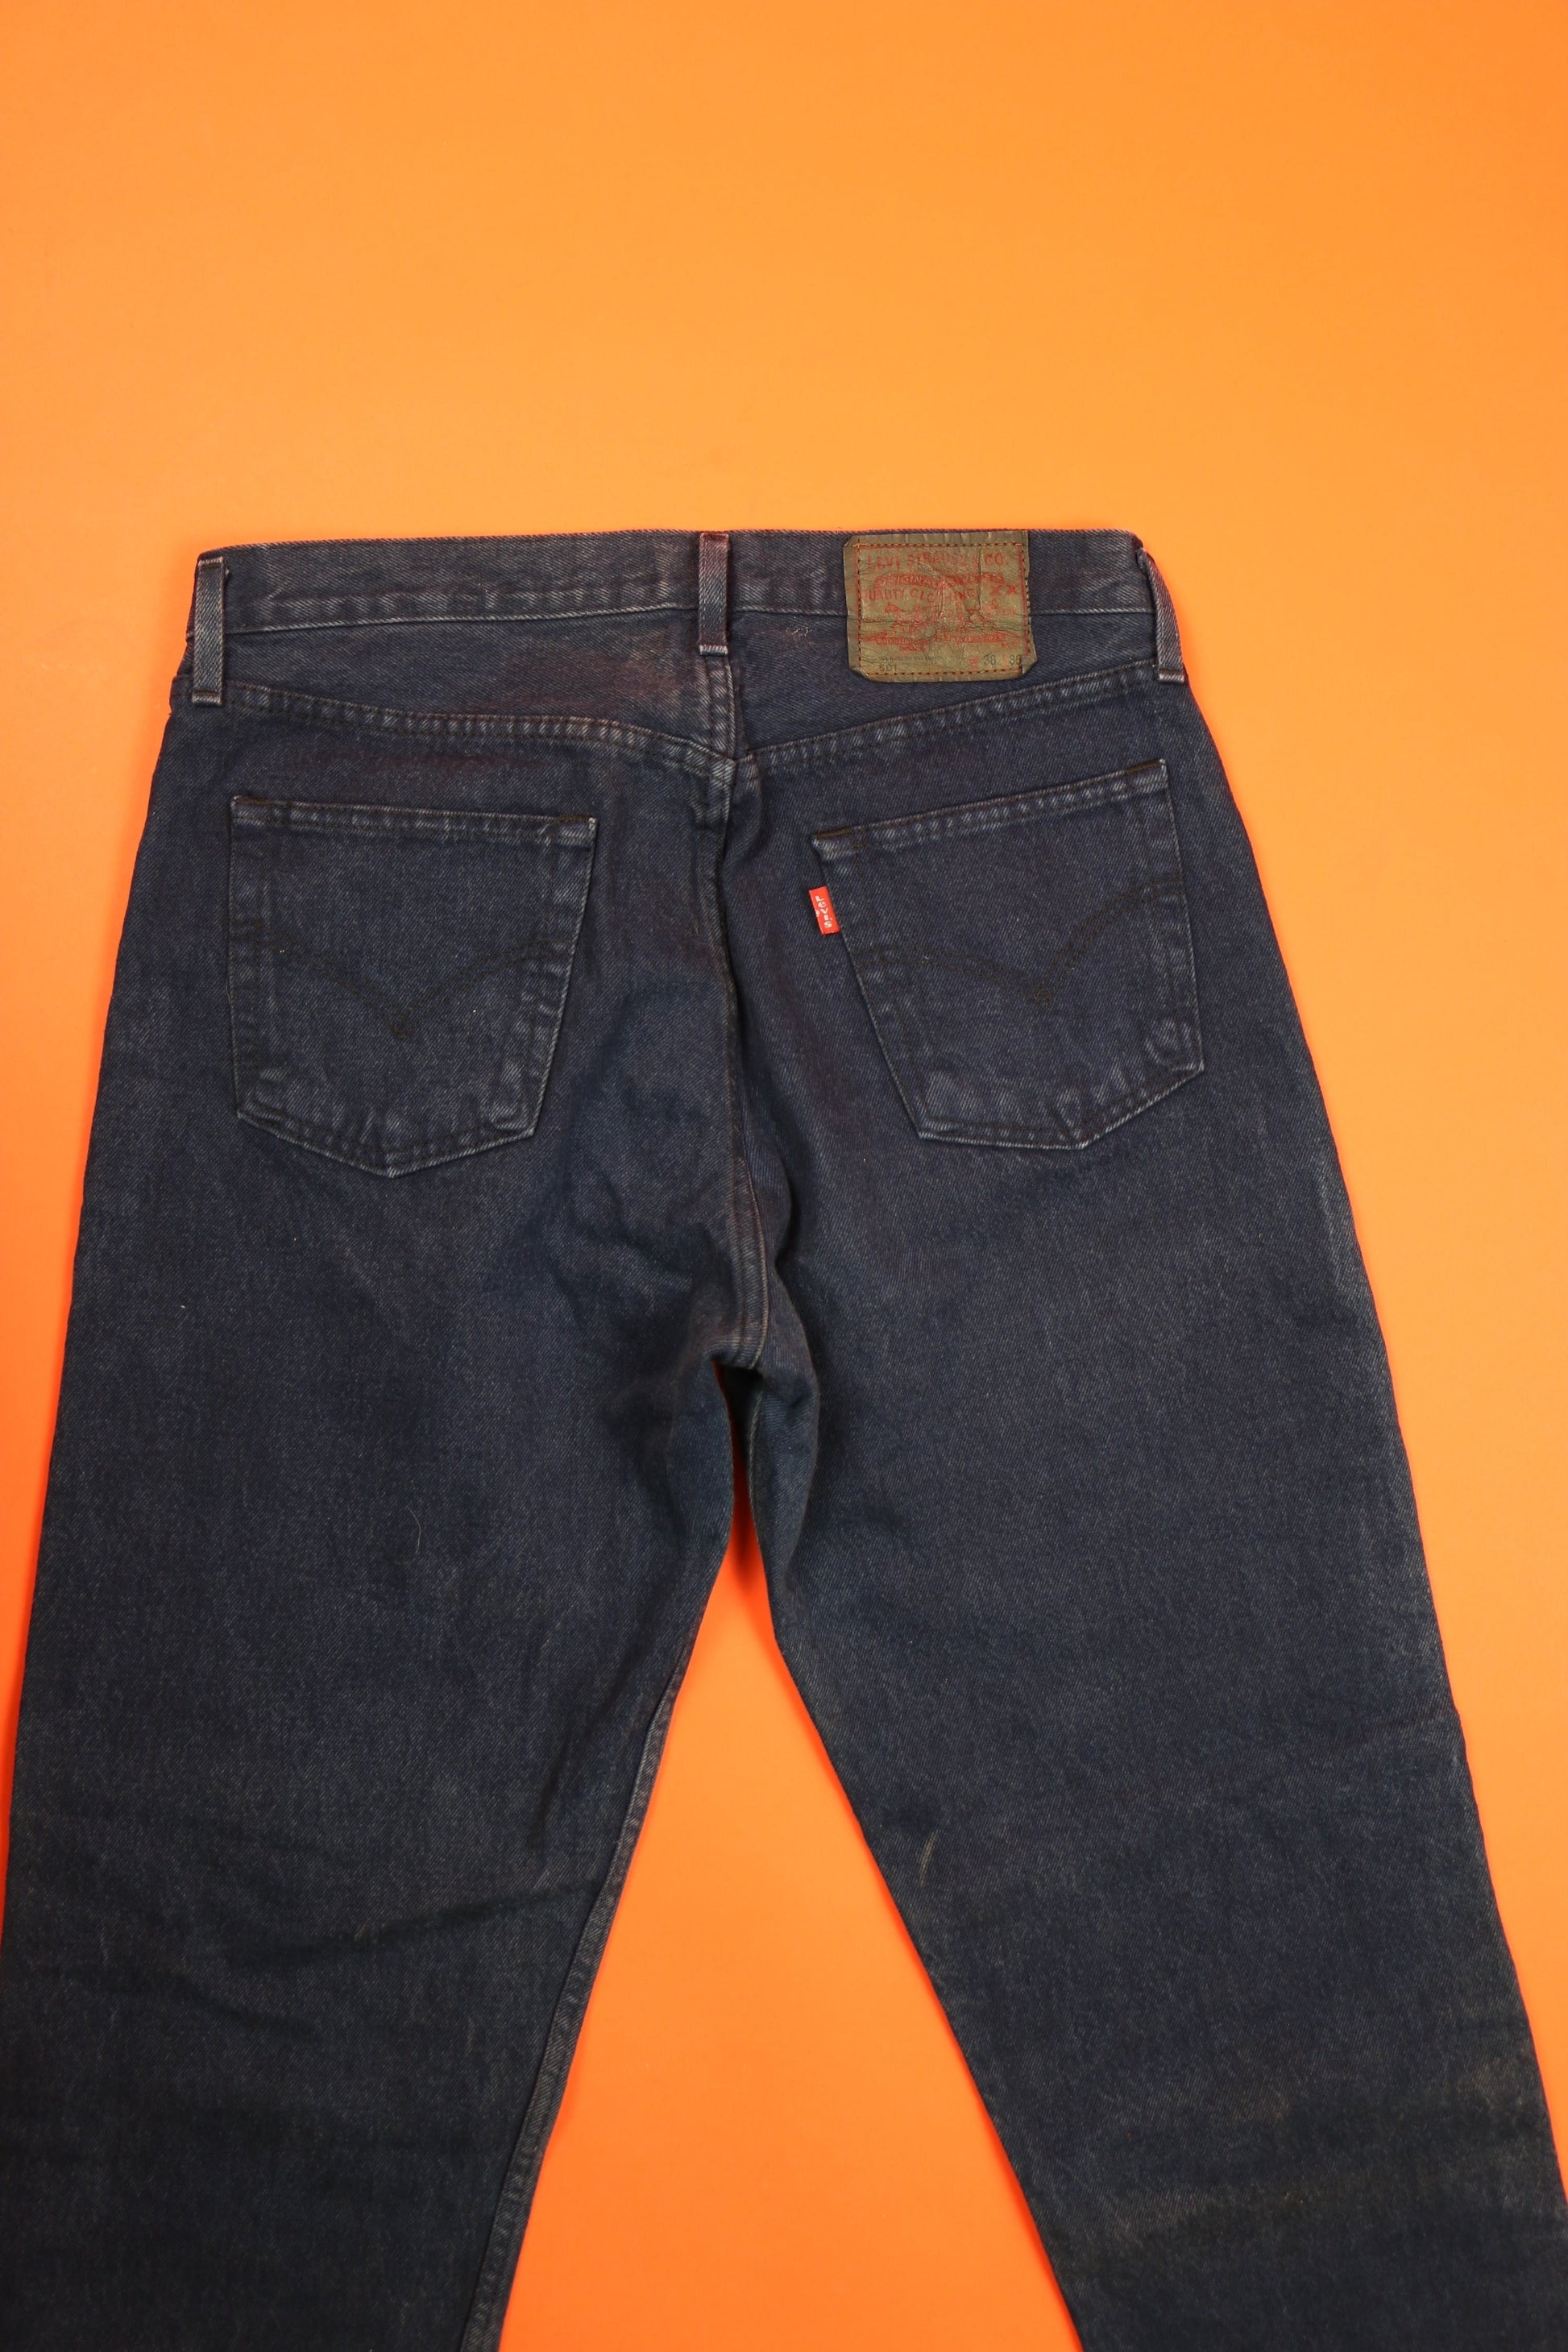 Levi's 501 Jeans Made in U.S.A. 'W38 L36' - vintage clothing clochard92.com